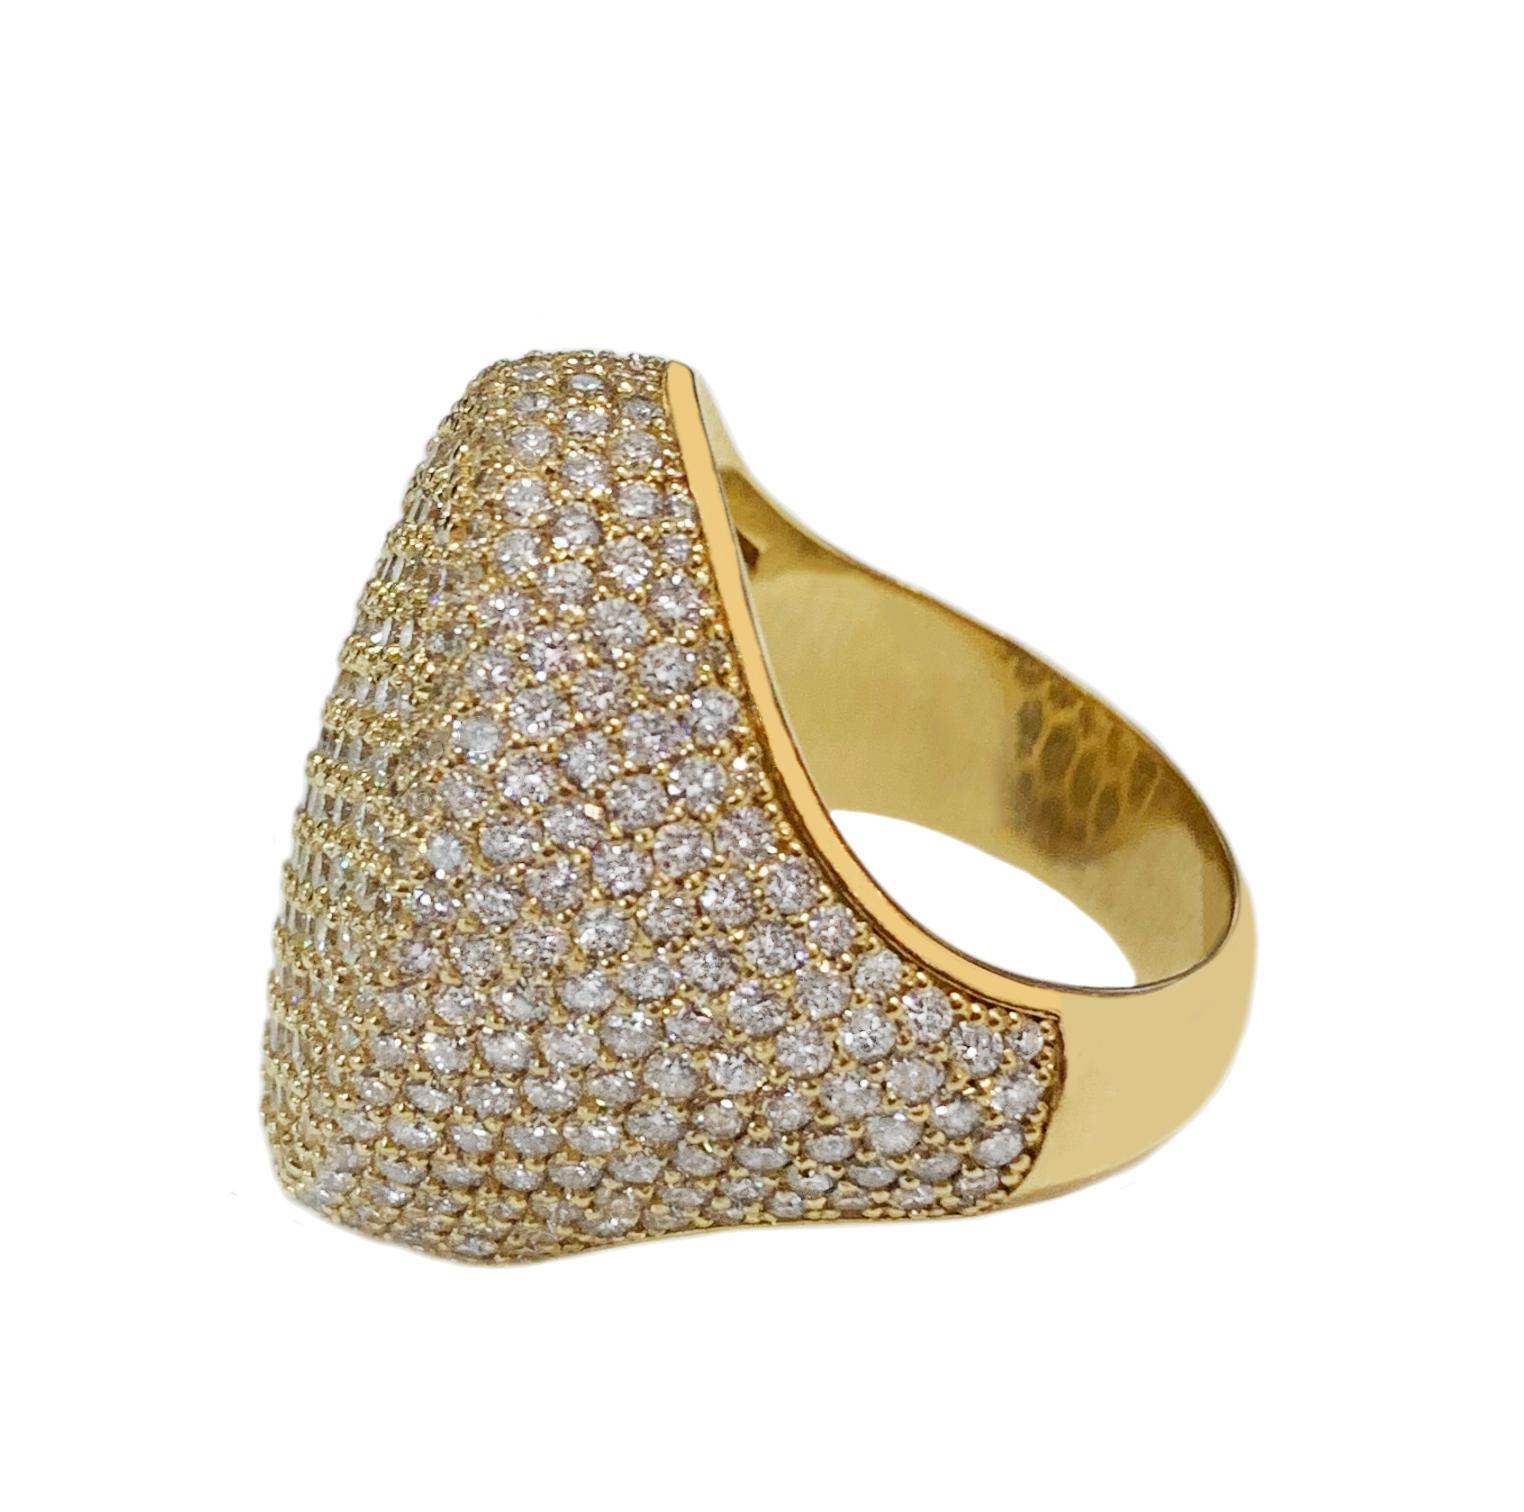 -Custom made
-14k Yellow Gold
-Ring size: 8.5
-Diamonds: 5.9ct, VS clarity
-Ring weight: 15gr
